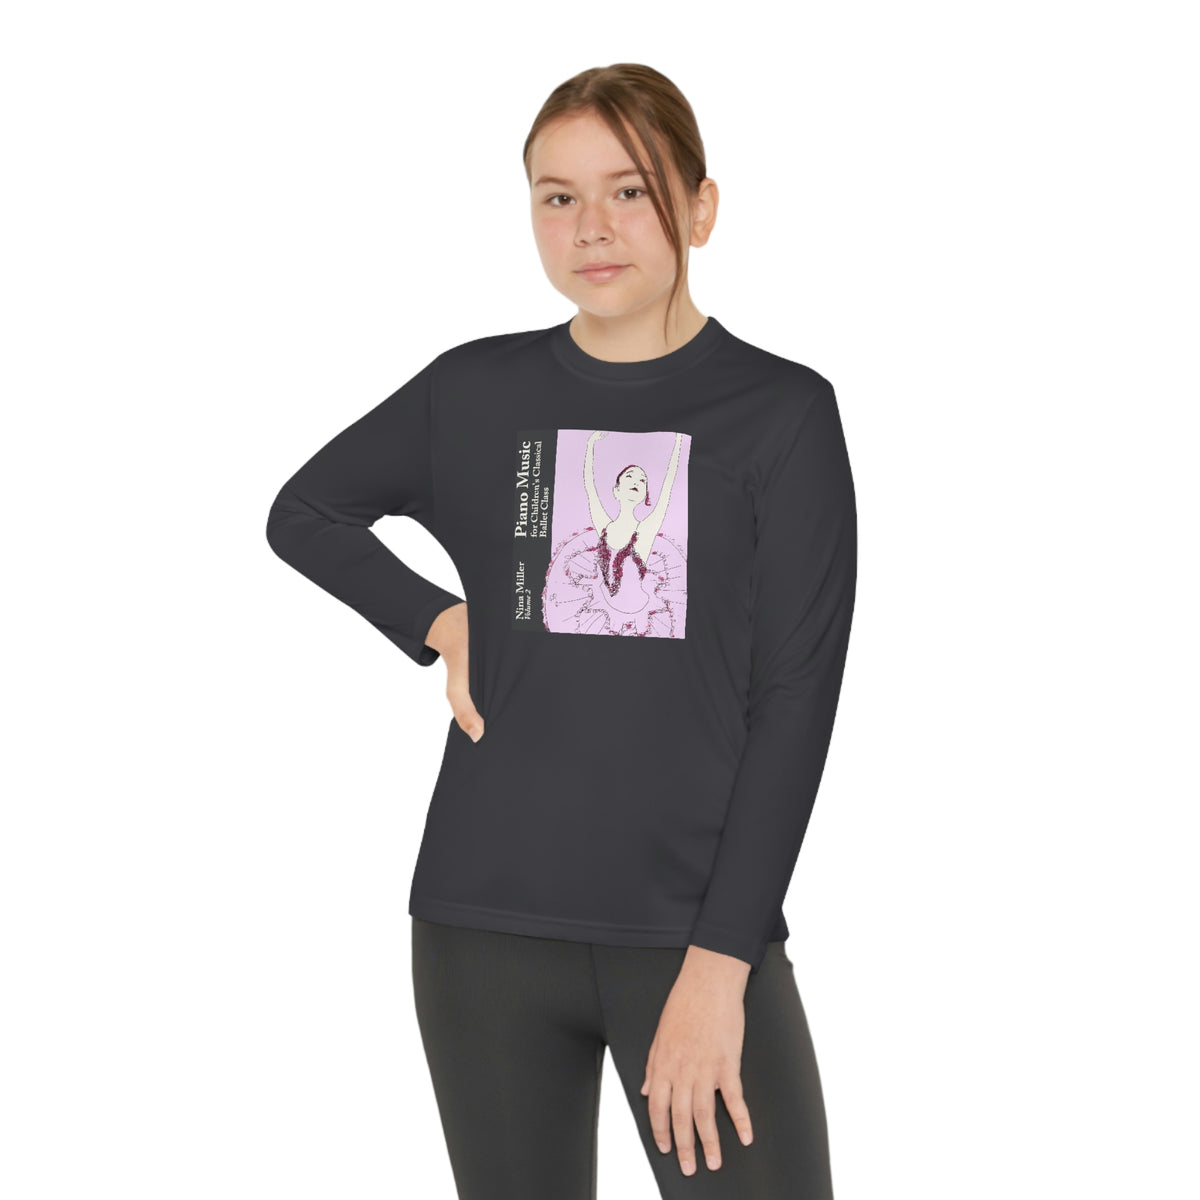 Children's Ballet Class, Vol. 2 - Youth Long Sleeve Competitor Tee